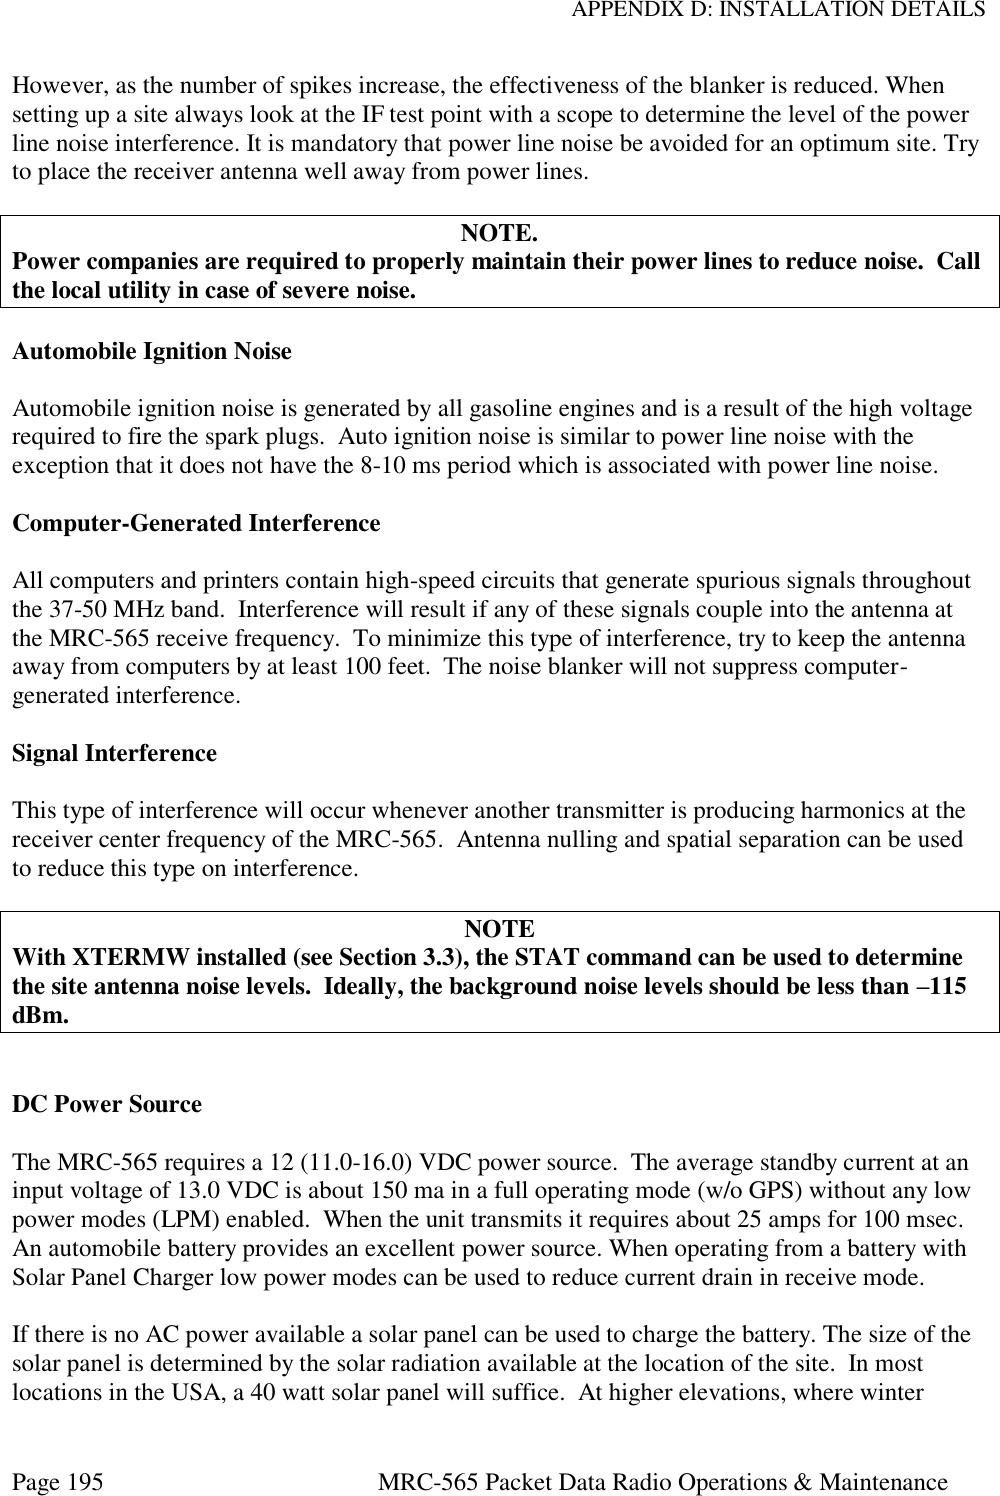 APPENDIX D: INSTALLATION DETAILS Page 195  MRC-565 Packet Data Radio Operations &amp; Maintenance However, as the number of spikes increase, the effectiveness of the blanker is reduced. When setting up a site always look at the IF test point with a scope to determine the level of the power line noise interference. It is mandatory that power line noise be avoided for an optimum site. Try to place the receiver antenna well away from power lines.  NOTE. Power companies are required to properly maintain their power lines to reduce noise.  Call the local utility in case of severe noise.   Automobile Ignition Noise  Automobile ignition noise is generated by all gasoline engines and is a result of the high voltage required to fire the spark plugs.  Auto ignition noise is similar to power line noise with the exception that it does not have the 8-10 ms period which is associated with power line noise.   Computer-Generated Interference  All computers and printers contain high-speed circuits that generate spurious signals throughout the 37-50 MHz band.  Interference will result if any of these signals couple into the antenna at the MRC-565 receive frequency.  To minimize this type of interference, try to keep the antenna away from computers by at least 100 feet.  The noise blanker will not suppress computer-generated interference.  Signal Interference  This type of interference will occur whenever another transmitter is producing harmonics at the receiver center frequency of the MRC-565.  Antenna nulling and spatial separation can be used to reduce this type on interference.  NOTE With XTERMW installed (see Section 3.3), the STAT command can be used to determine the site antenna noise levels.  Ideally, the background noise levels should be less than –115 dBm.   DC Power Source  The MRC-565 requires a 12 (11.0-16.0) VDC power source.  The average standby current at an input voltage of 13.0 VDC is about 150 ma in a full operating mode (w/o GPS) without any low power modes (LPM) enabled.  When the unit transmits it requires about 25 amps for 100 msec.  An automobile battery provides an excellent power source. When operating from a battery with Solar Panel Charger low power modes can be used to reduce current drain in receive mode.  If there is no AC power available a solar panel can be used to charge the battery. The size of the solar panel is determined by the solar radiation available at the location of the site.  In most locations in the USA, a 40 watt solar panel will suffice.  At higher elevations, where winter 